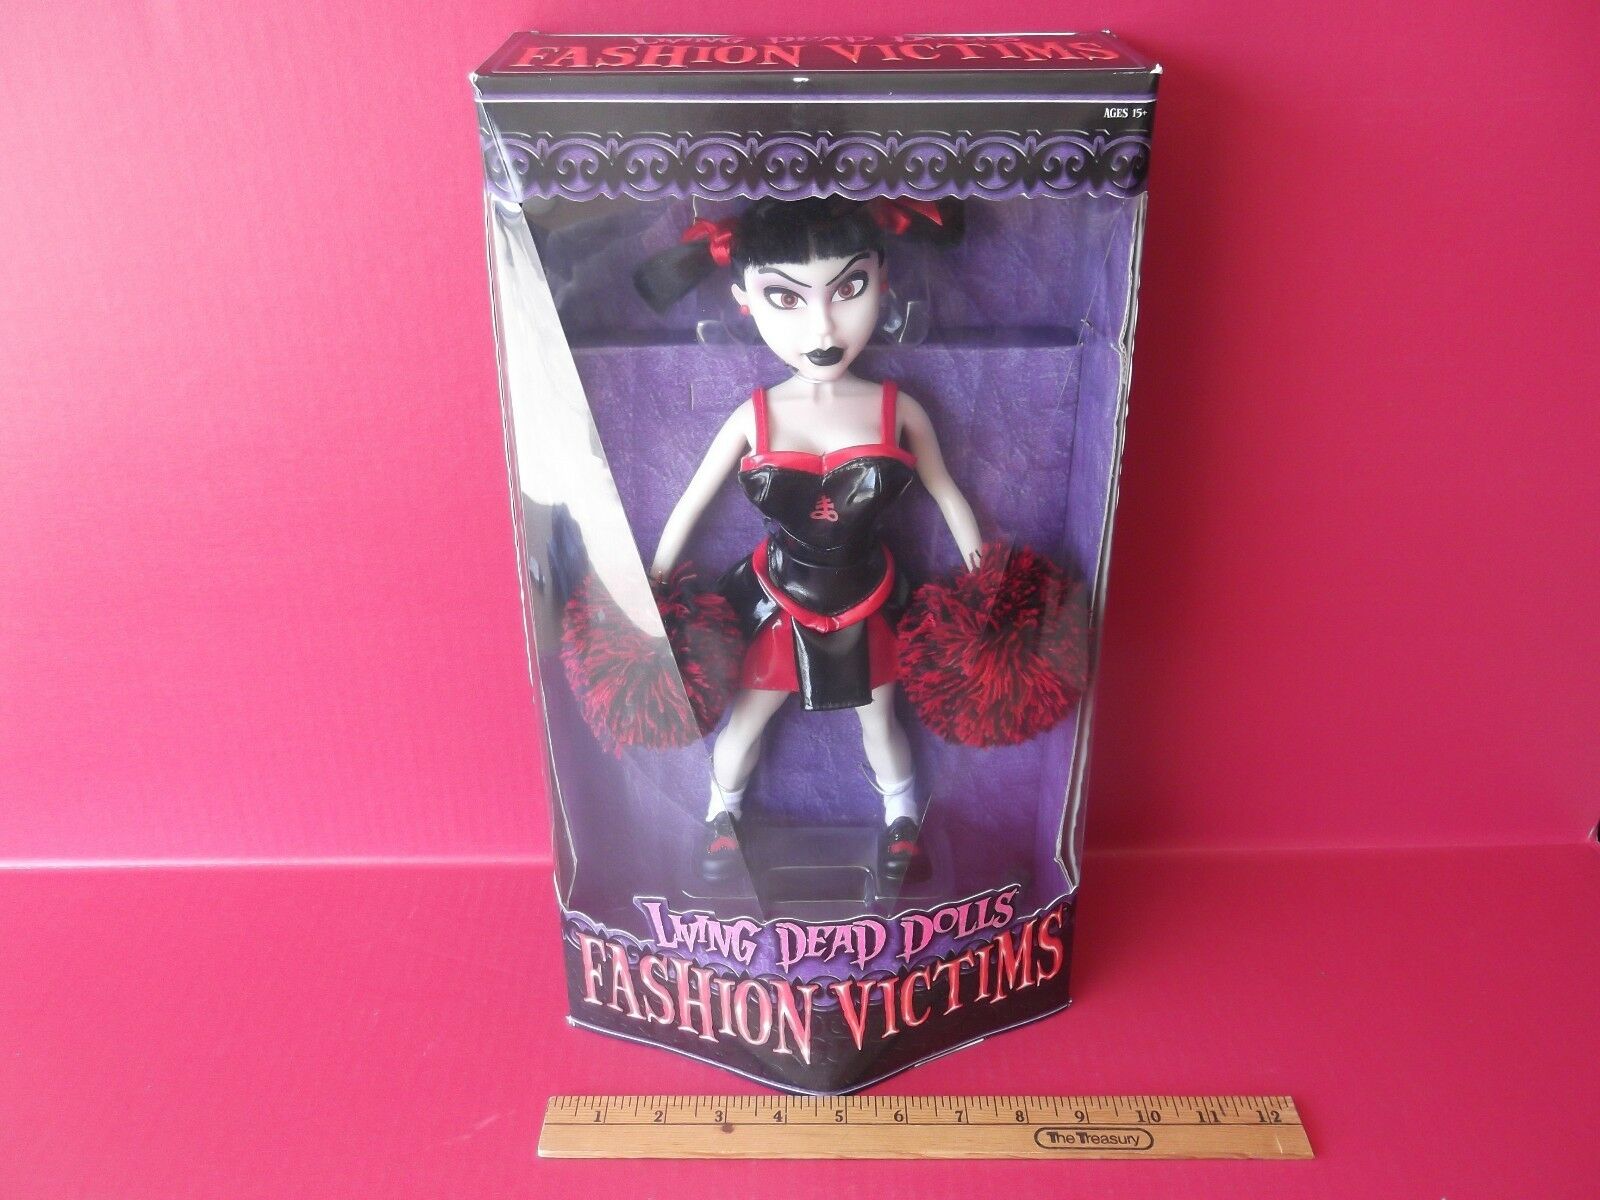 Mezco Lining Dead Doll Fasion Victims Sexy Creepy Kitty 12"in Doll 2 Outfits